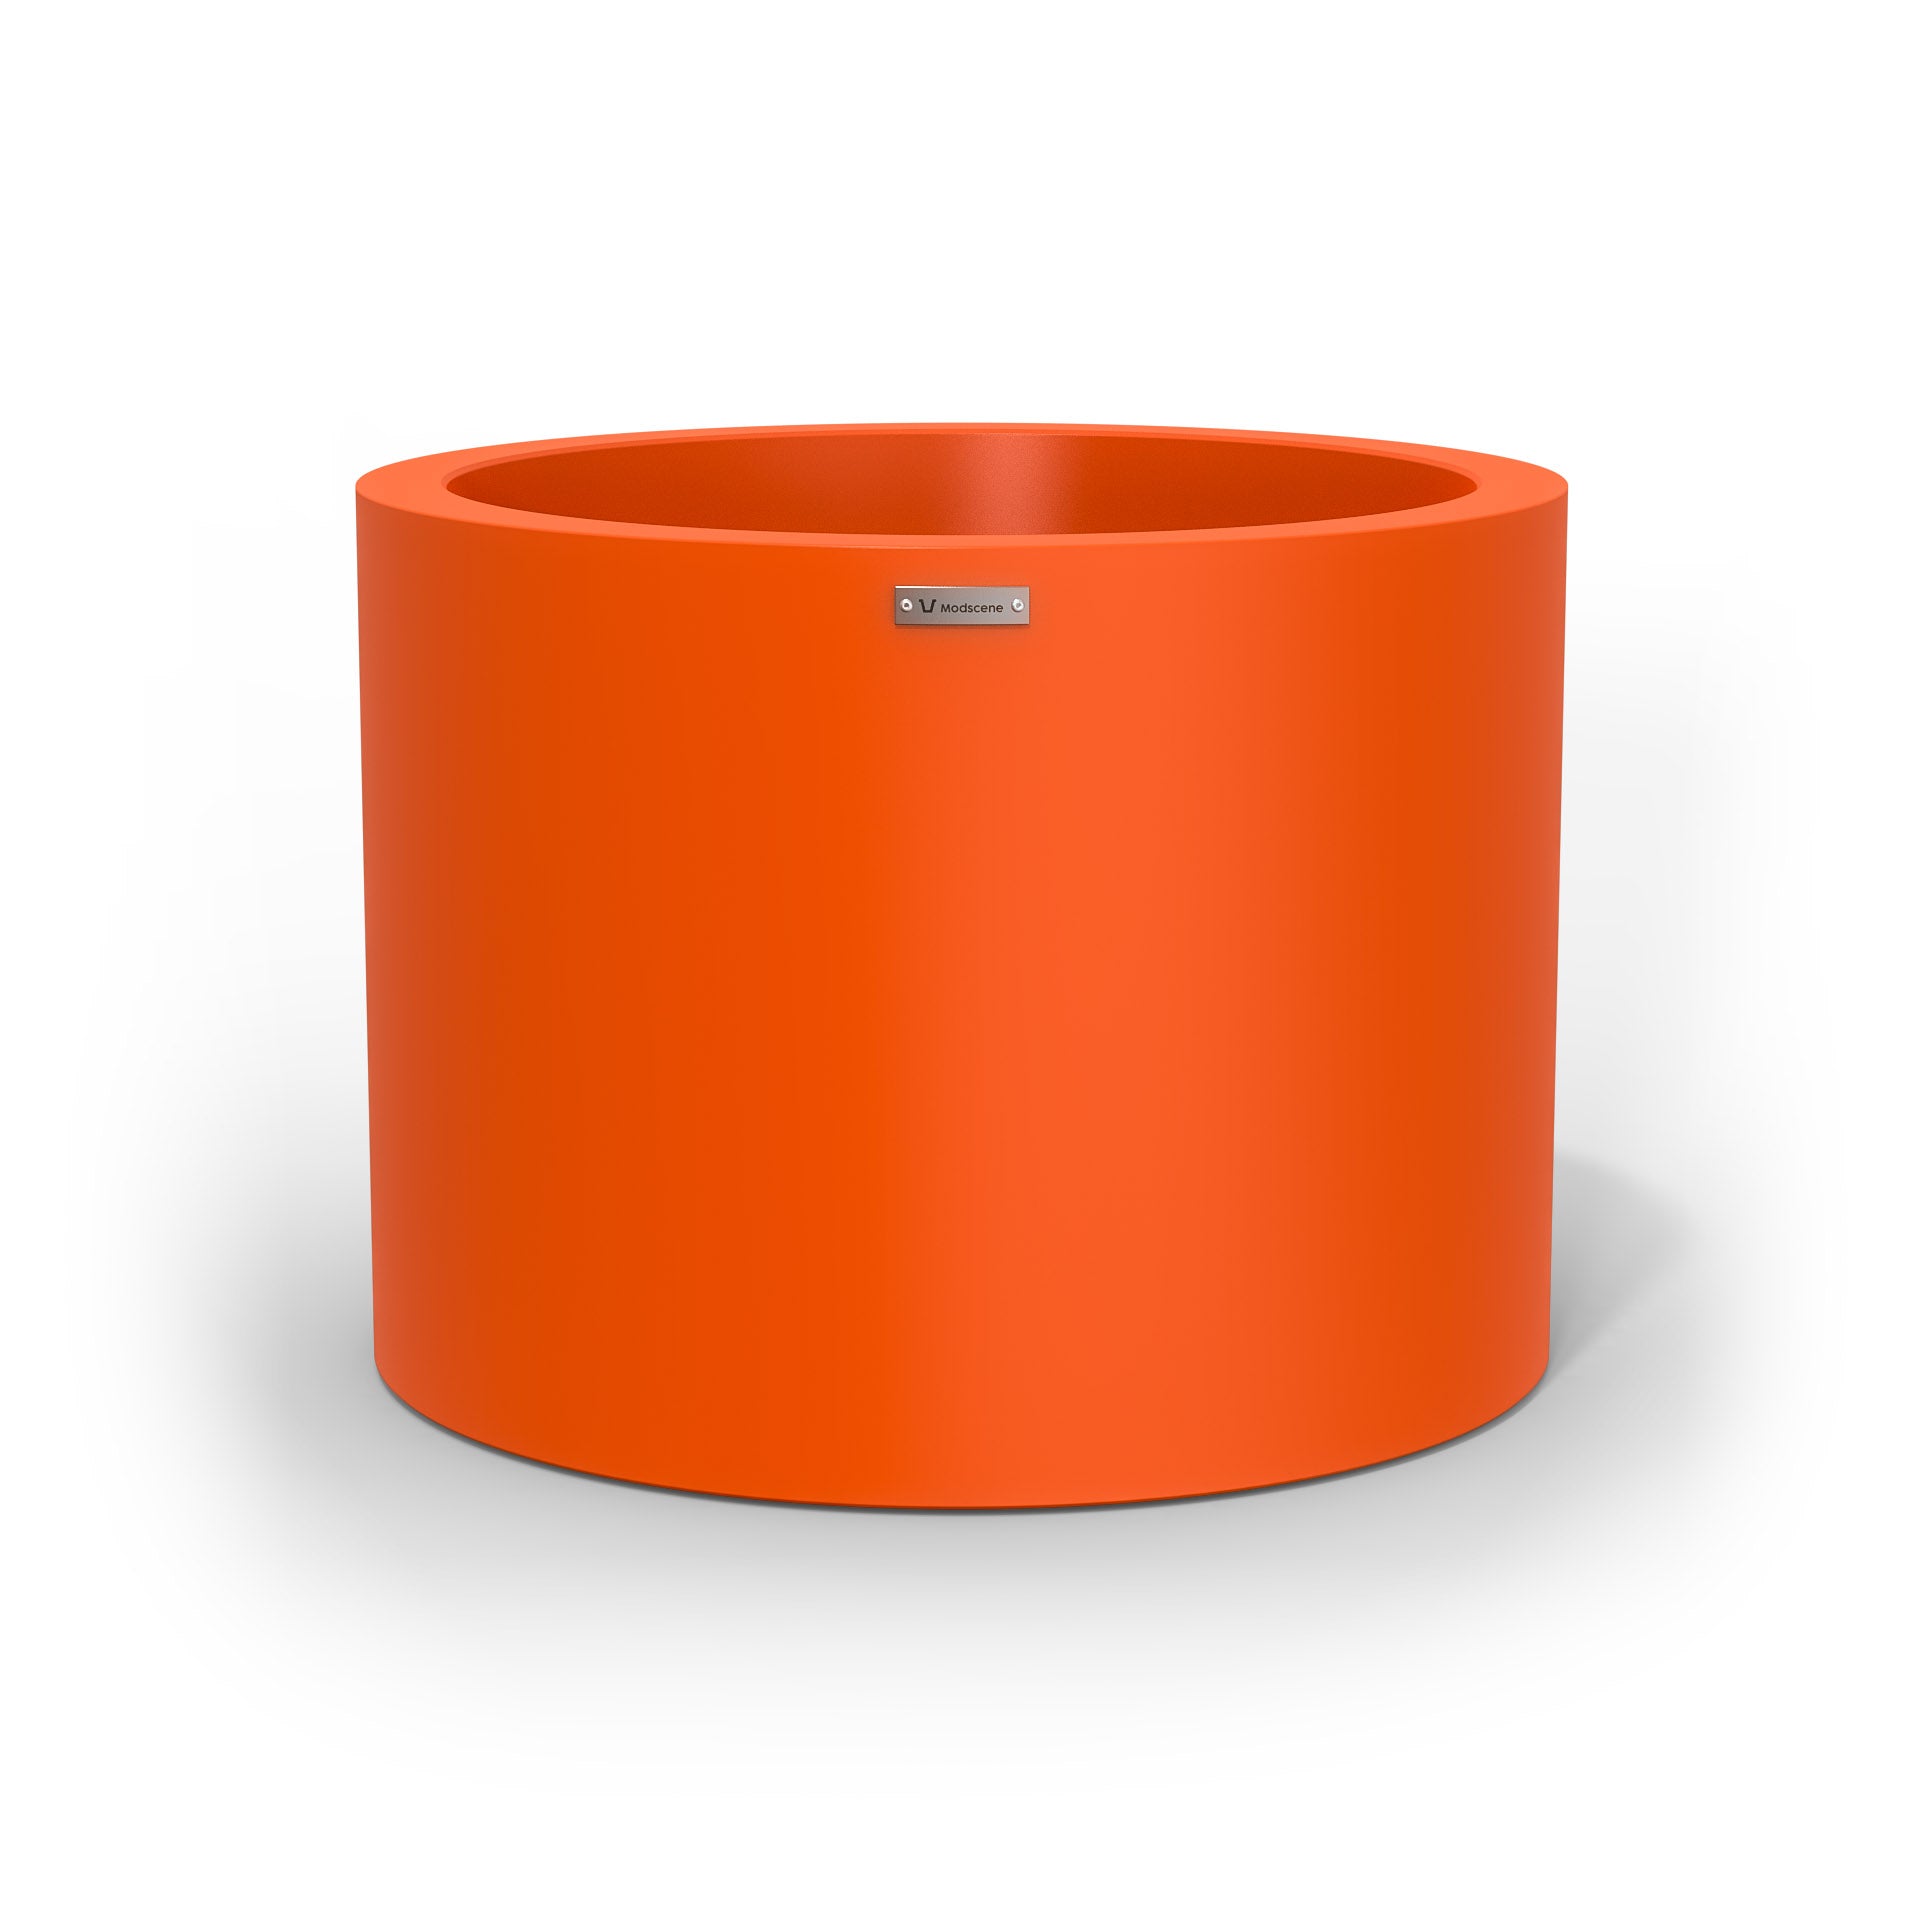 A cylinder shaped pot planter in orange made by Modscene New Zealand. 